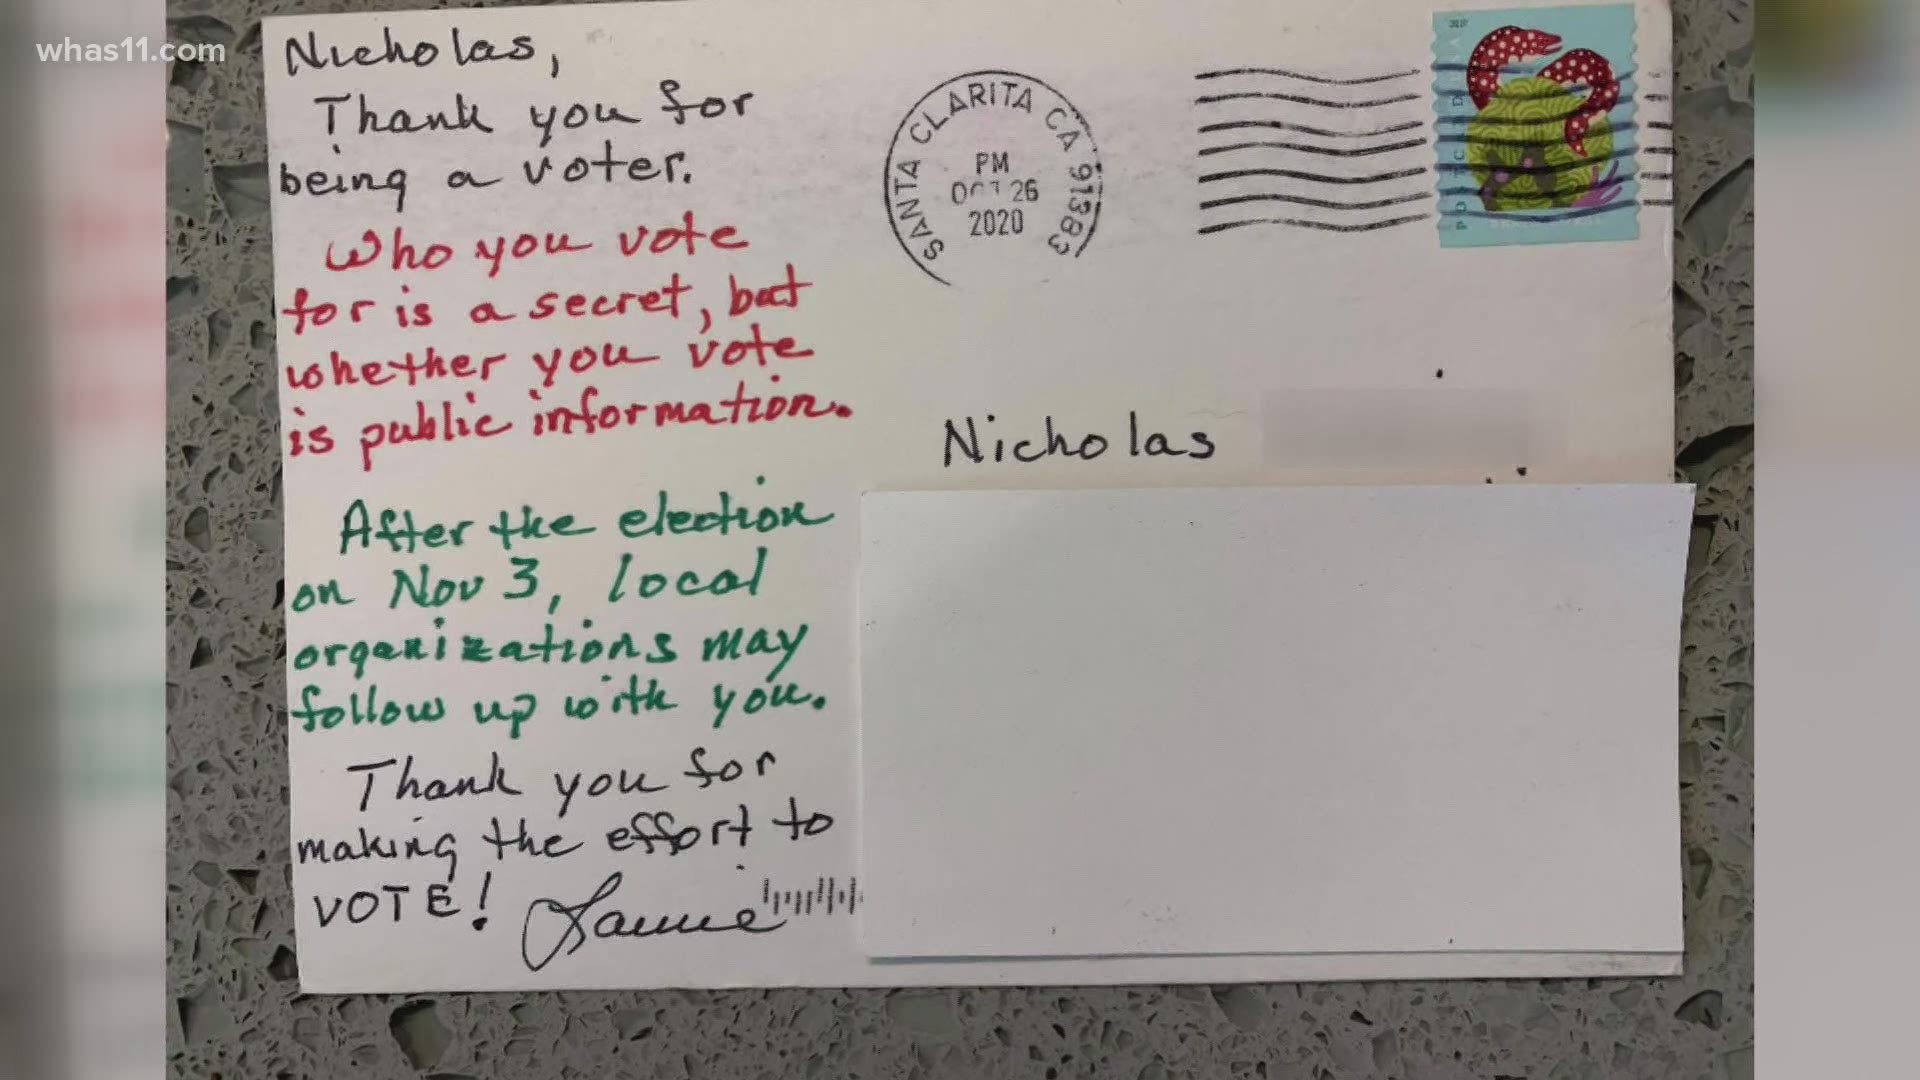 Postcards from people who do not live in Louisville have encouraged people to vote, saying 'local organizations may follow up' based on whether you vote or not.